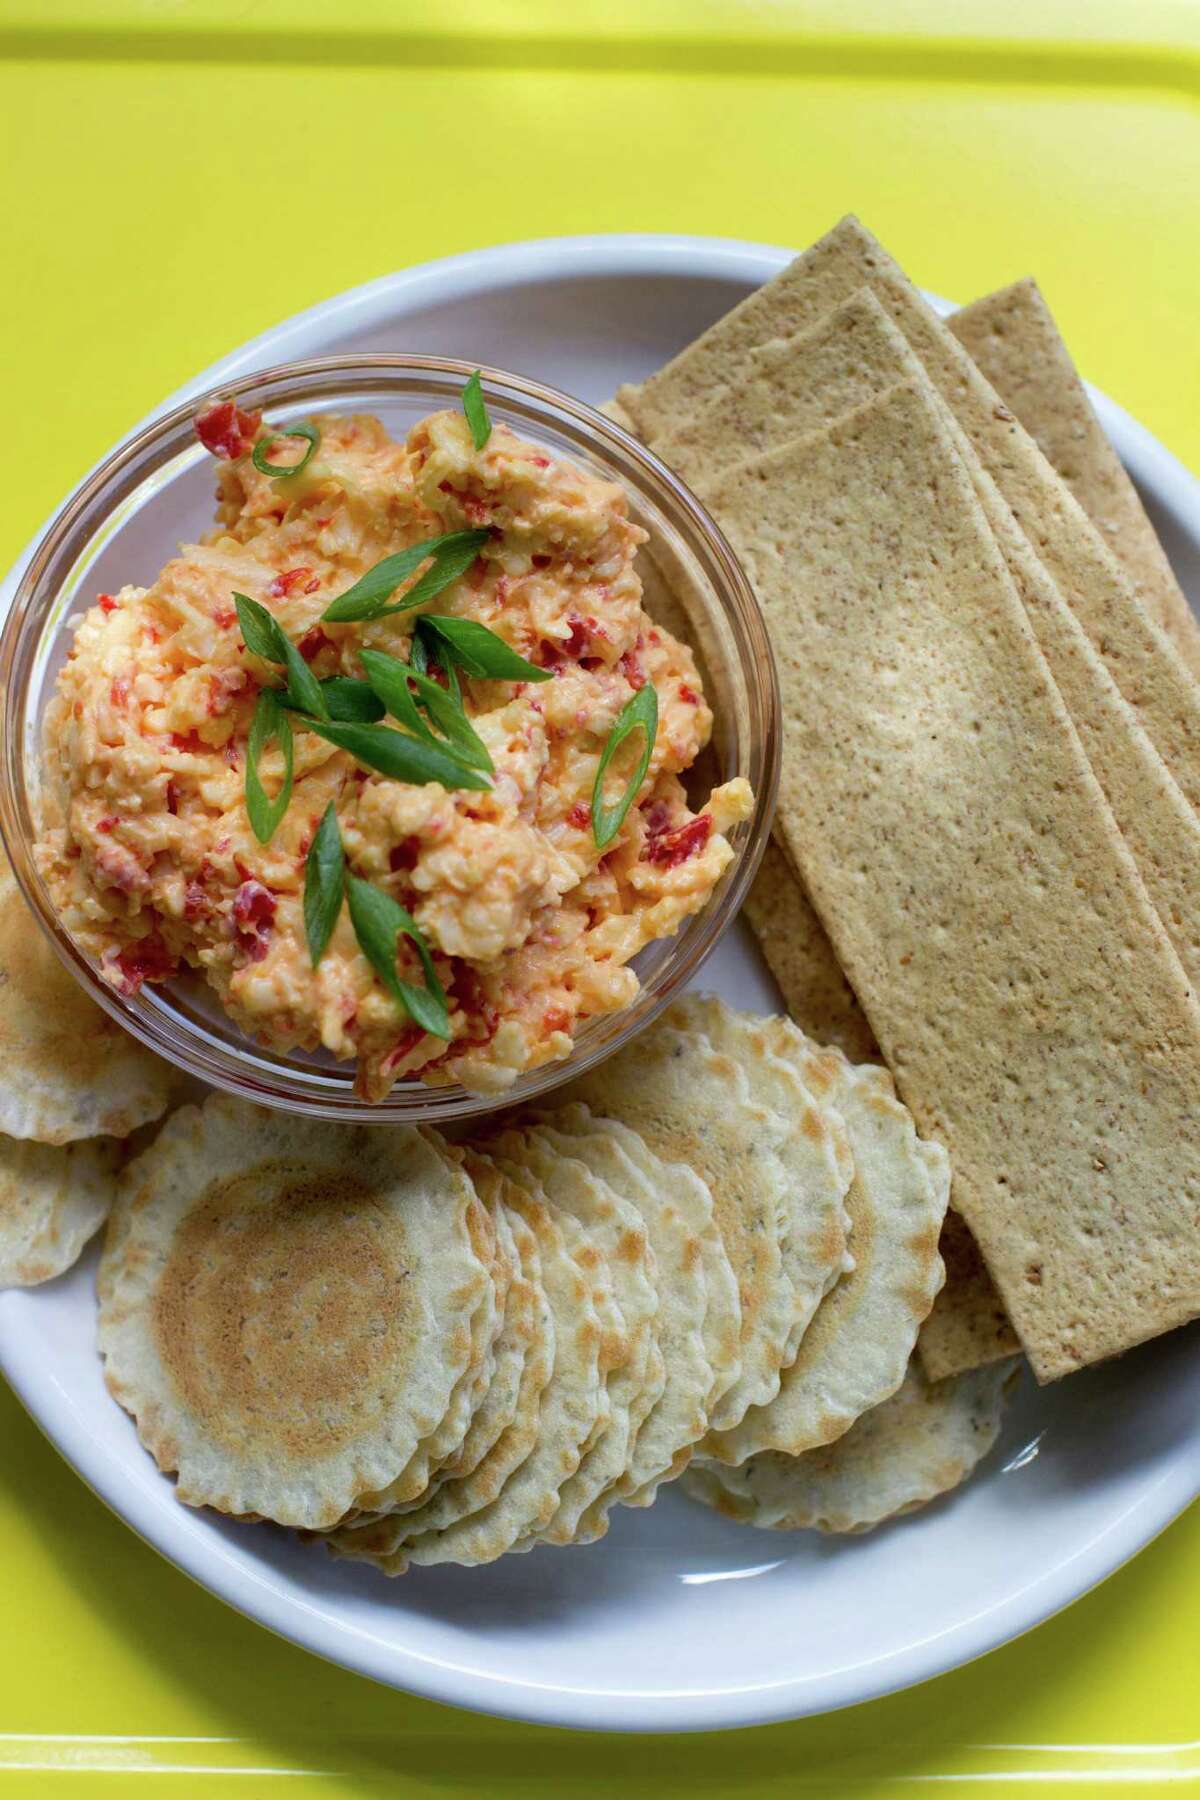 Pimiento cheese: Southern staple now considered trendy bar food